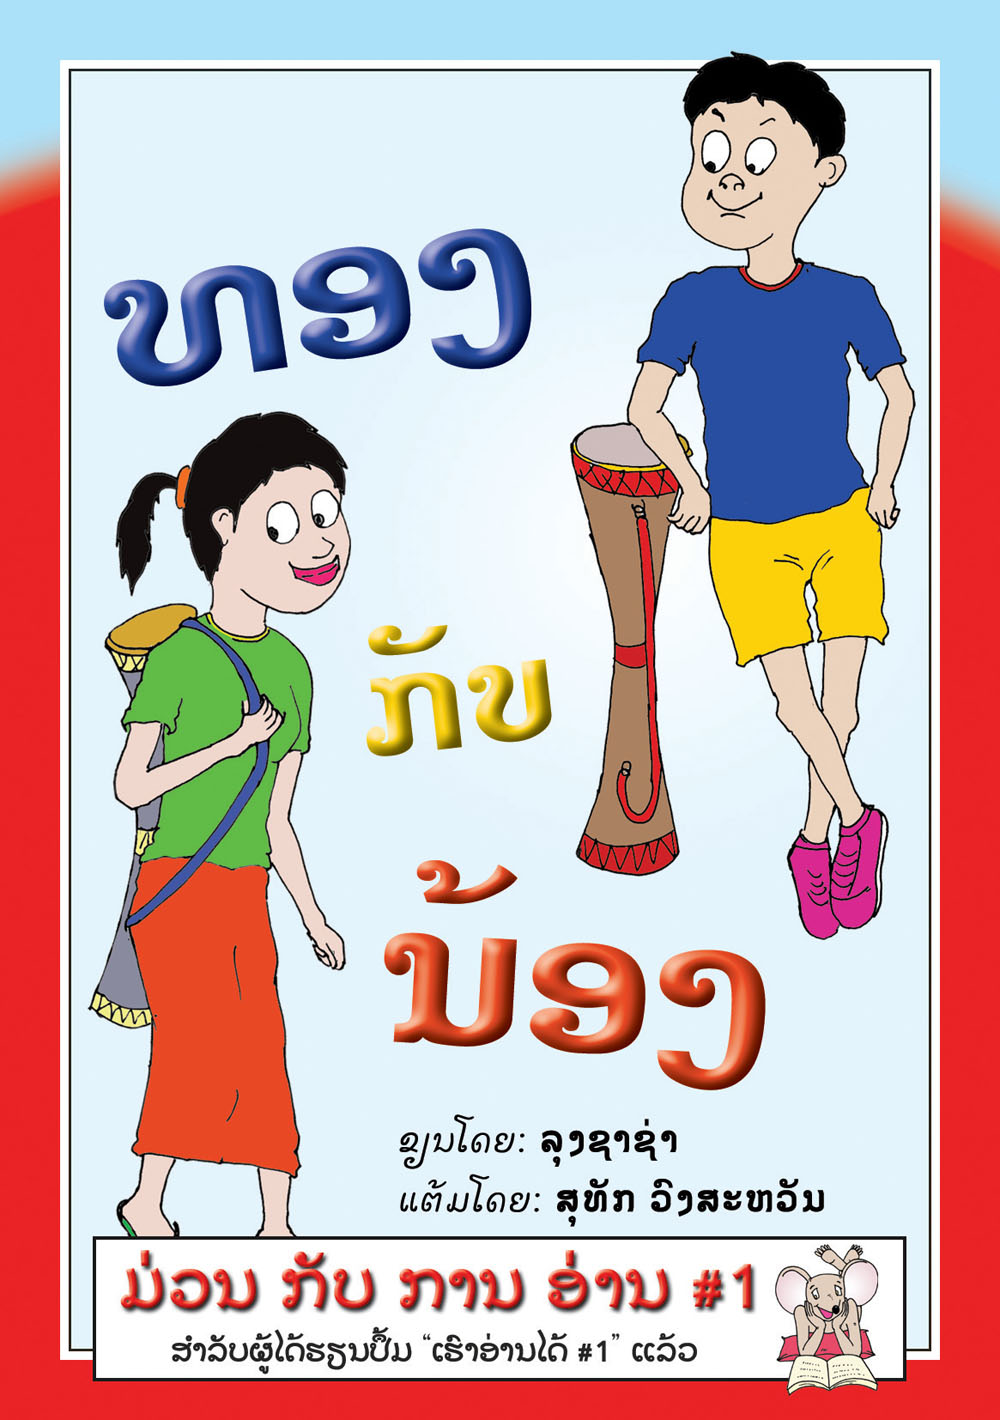 Tong and Nong large book cover, published in Lao language